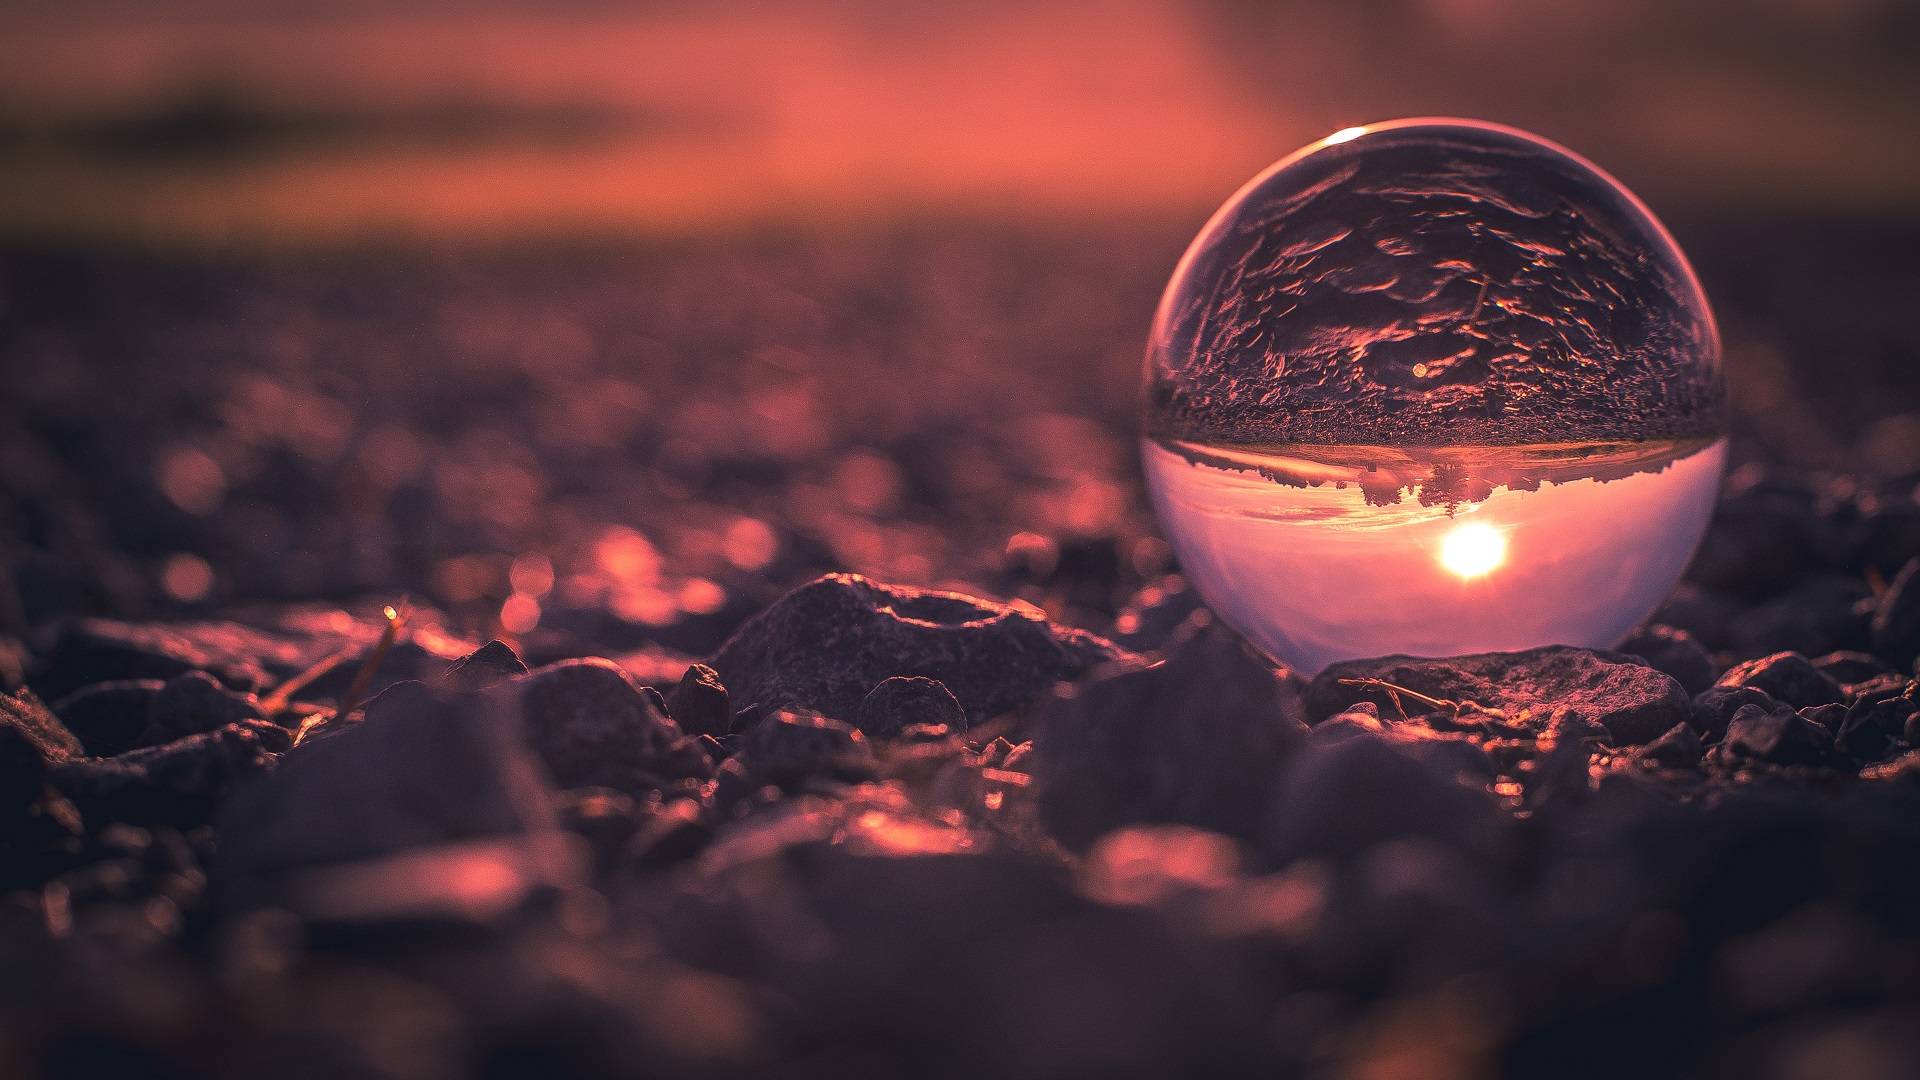 Sphere Marble Reflection 1920x1080